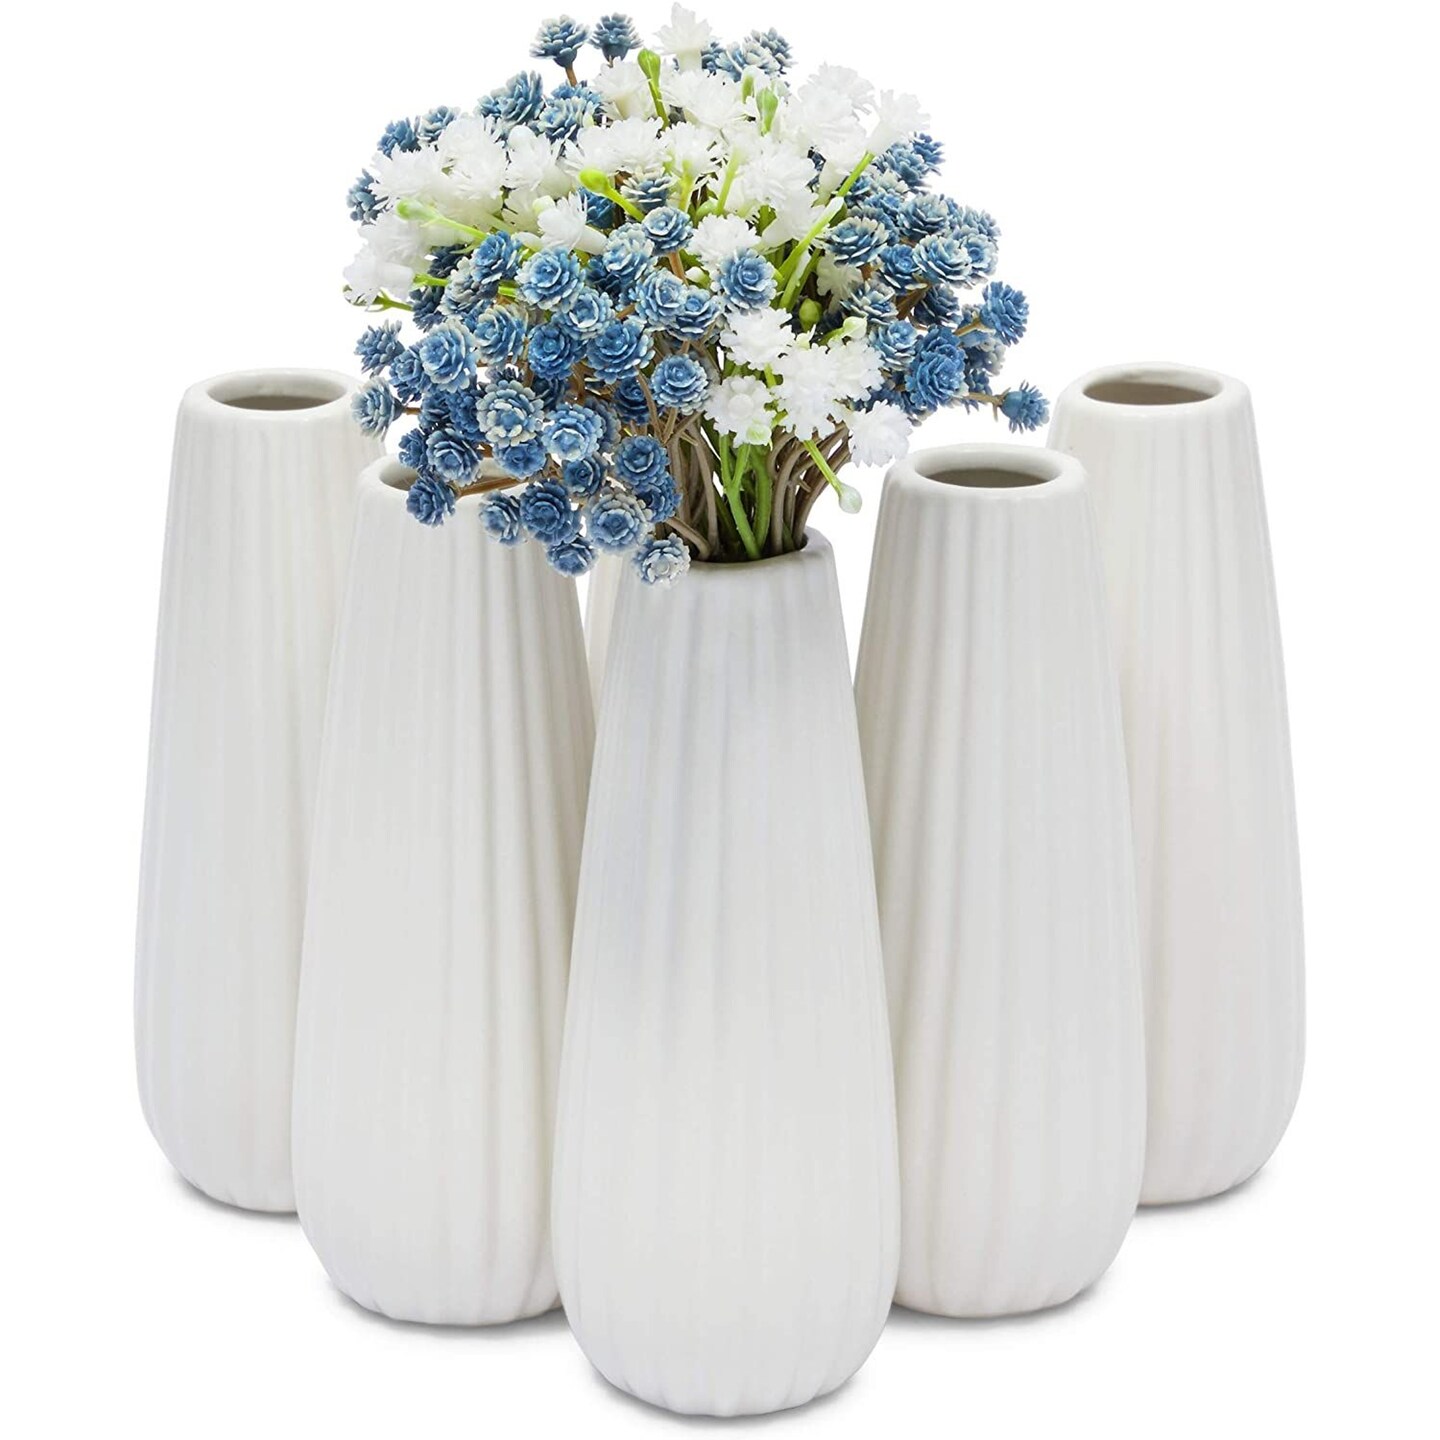 Set of 6 White Ceramic Bud Vases for Flowers, Centerpieces, Home Decor (1 x  6 In)